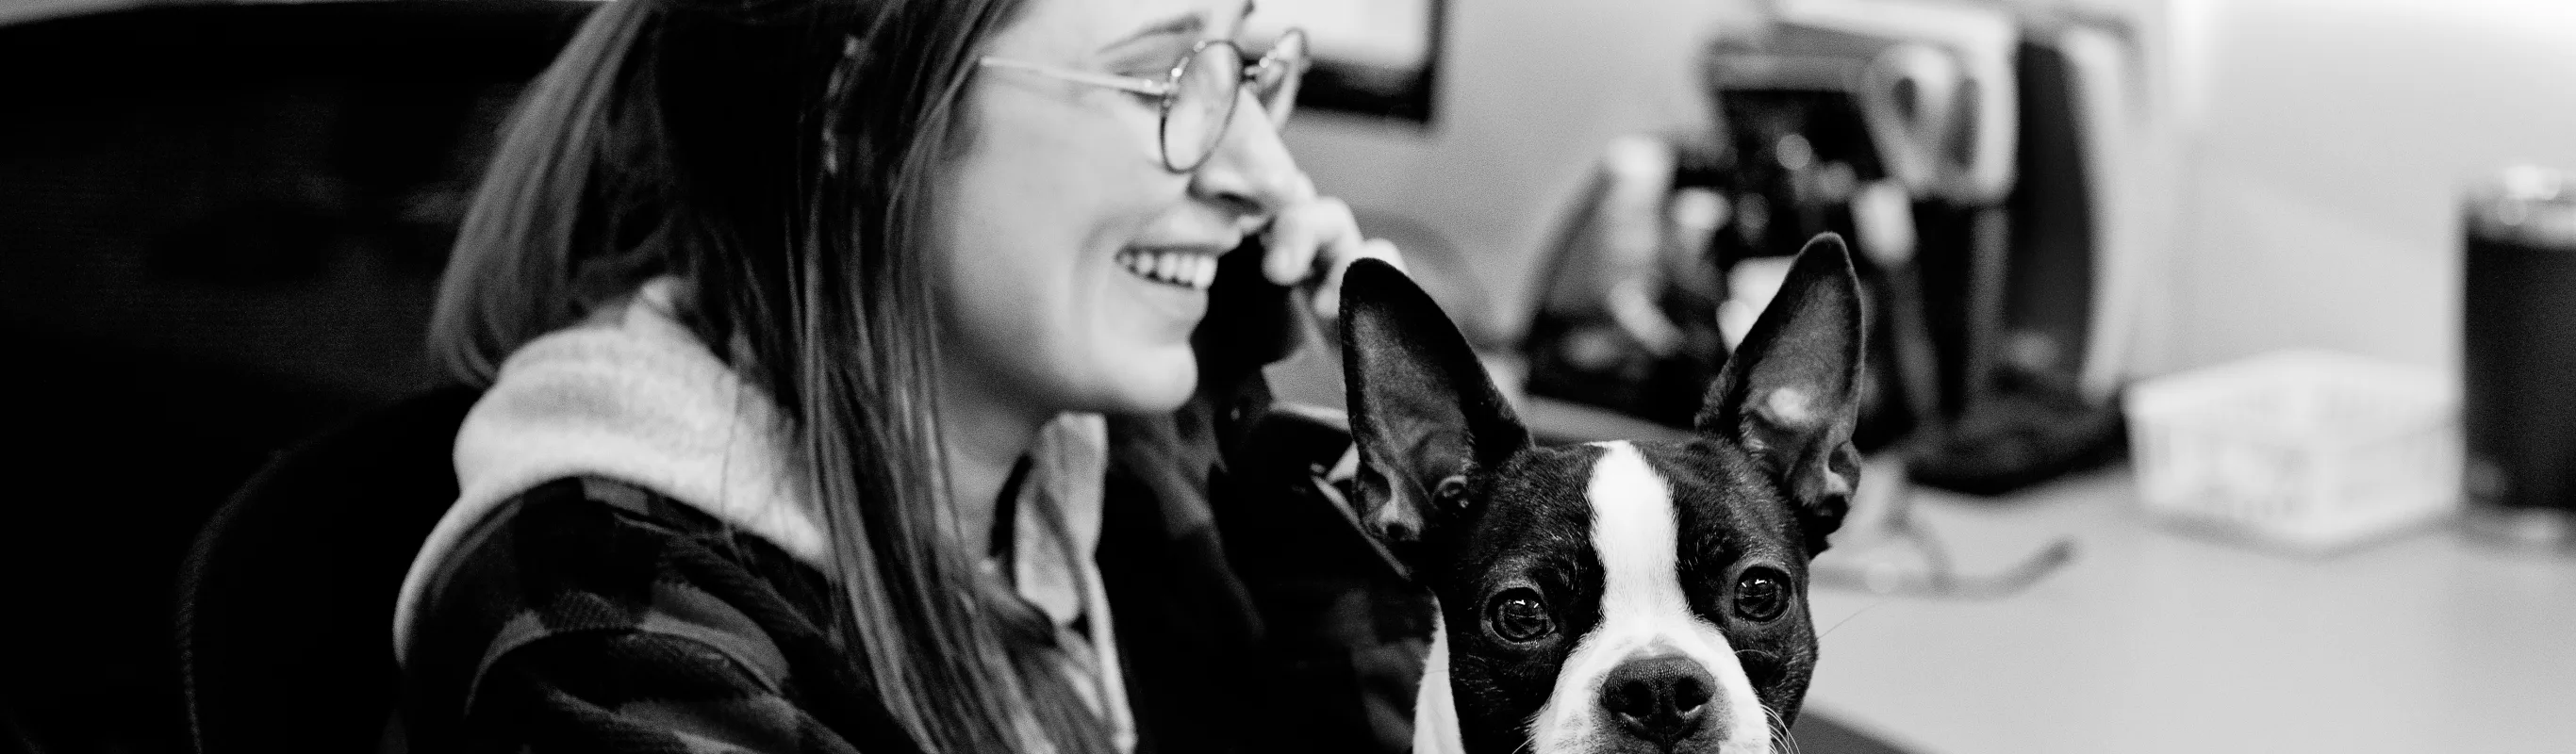 Black and white photo of an Eagleview Veterinary Hospital staff member on the phone with a dog.